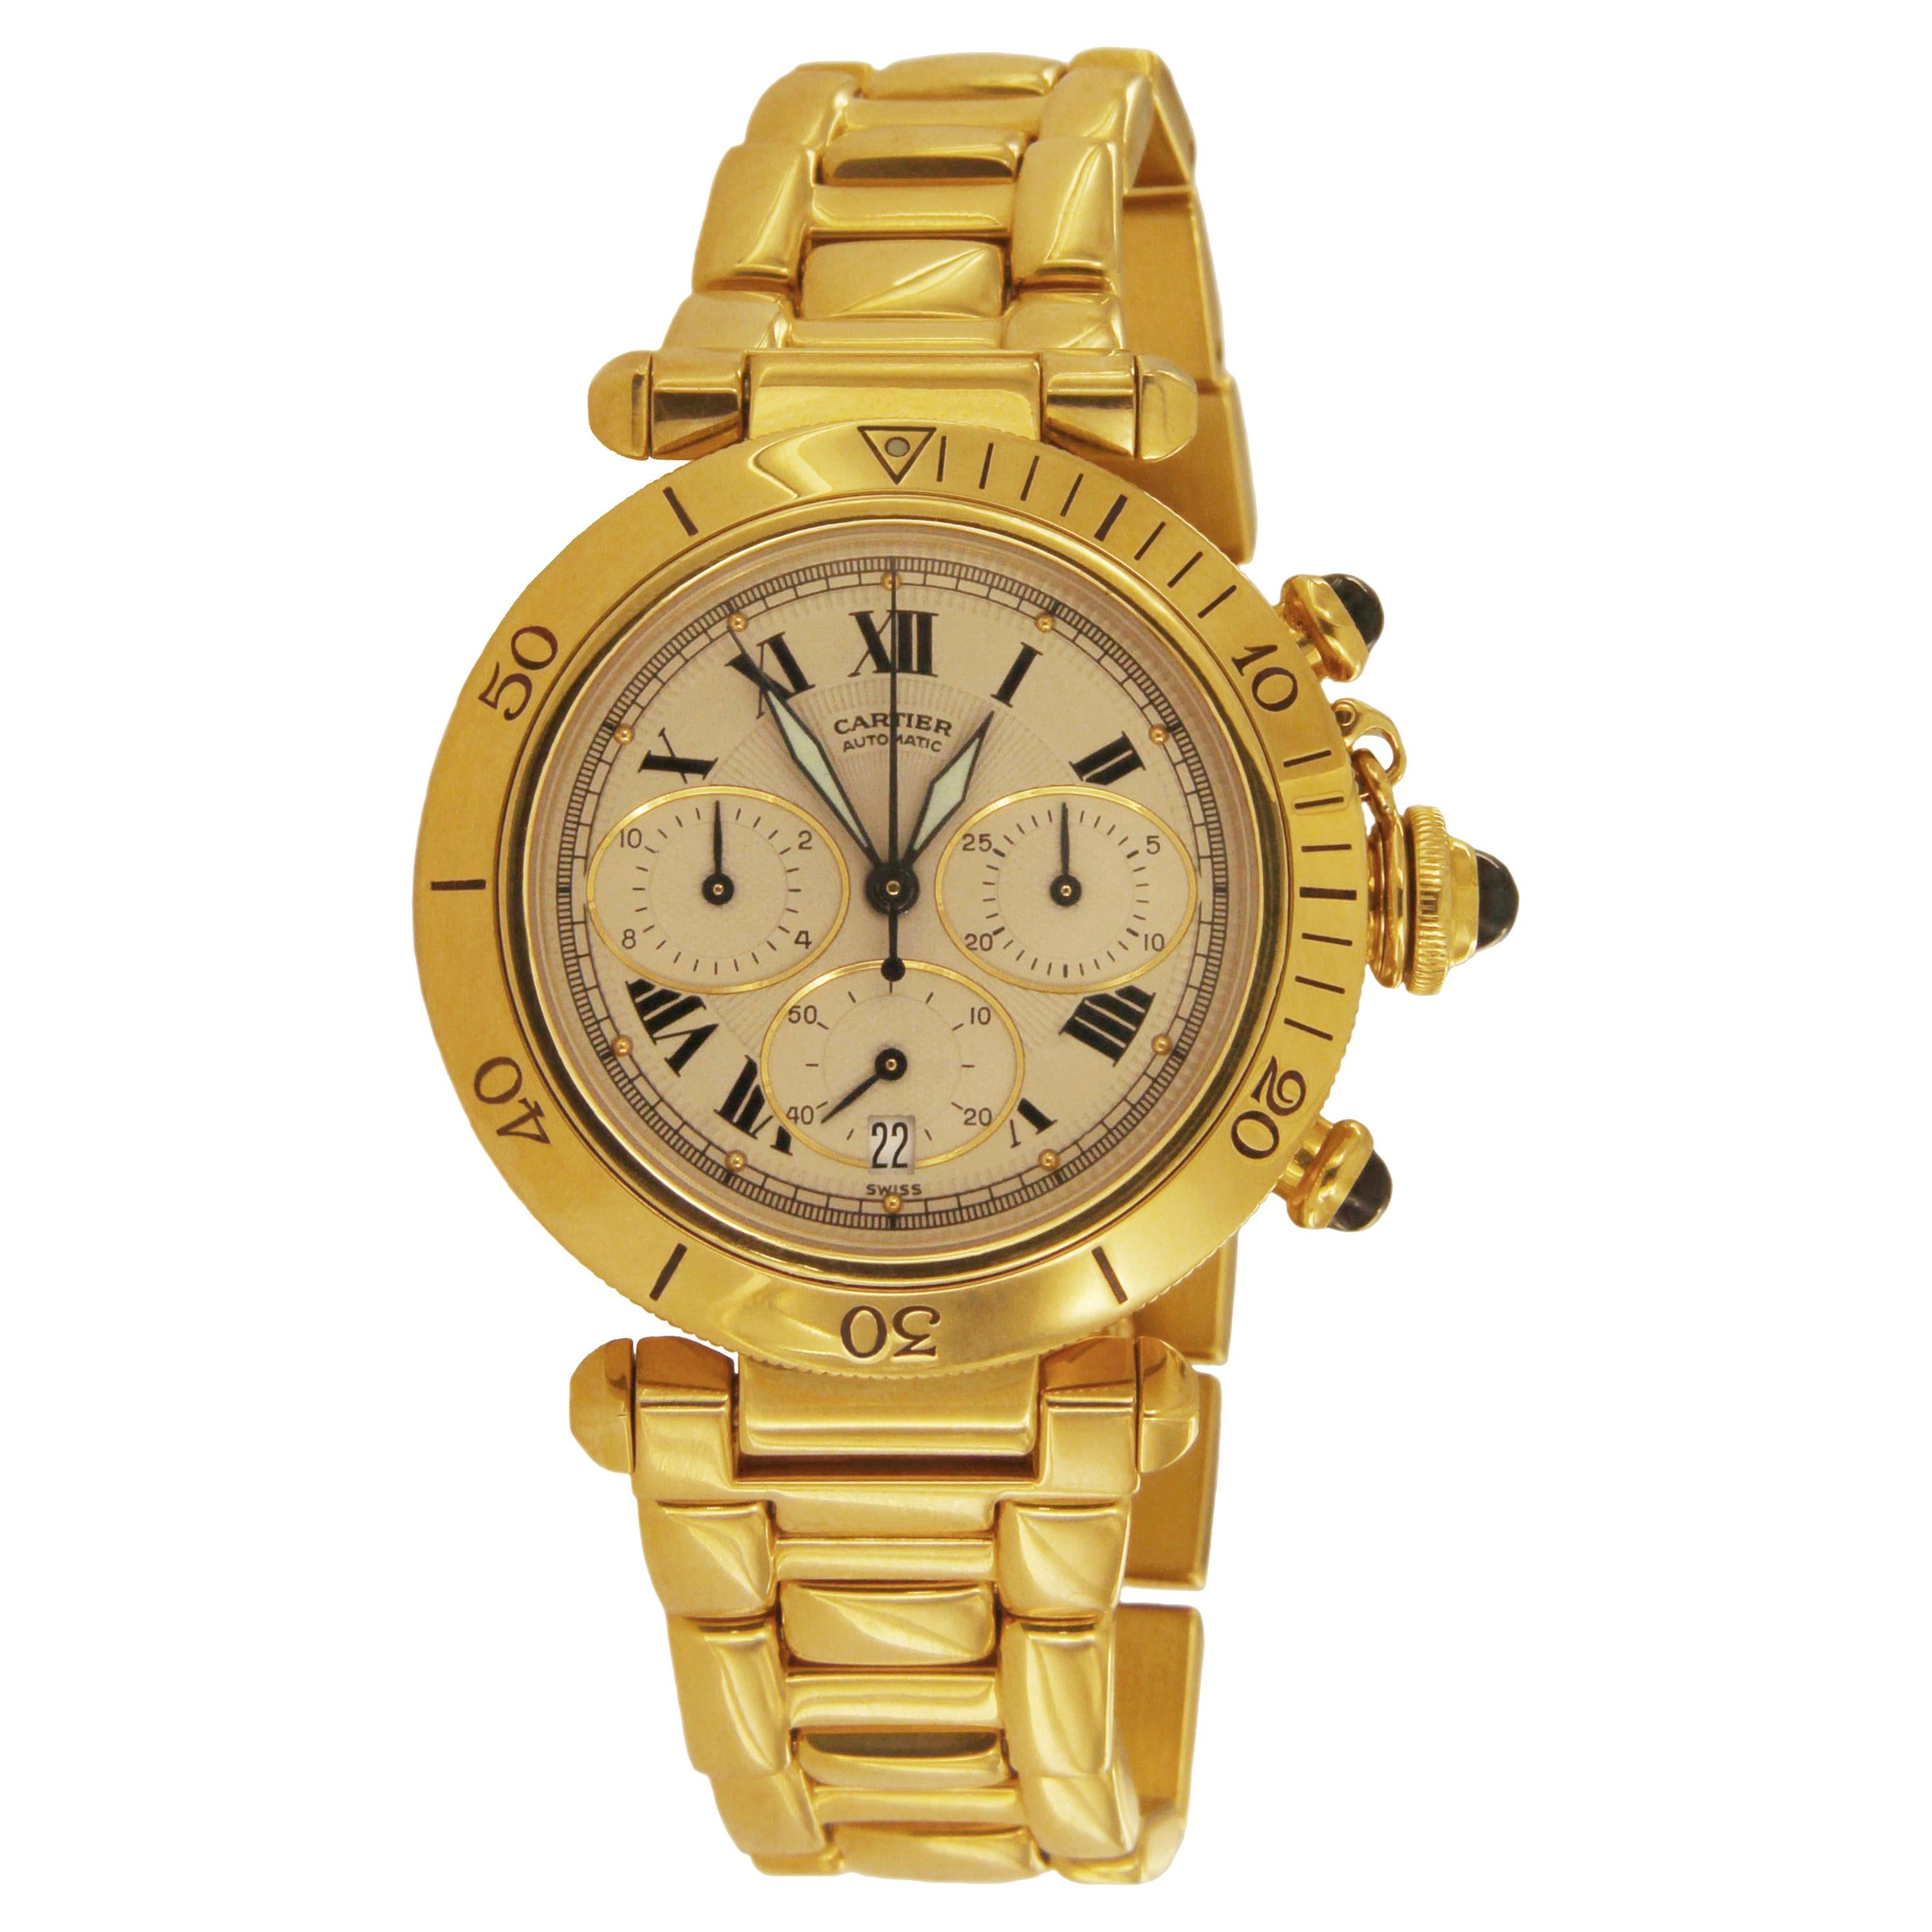 Cartier Pasha Chrono Yellow Gold Watch 2111 1 For Sale